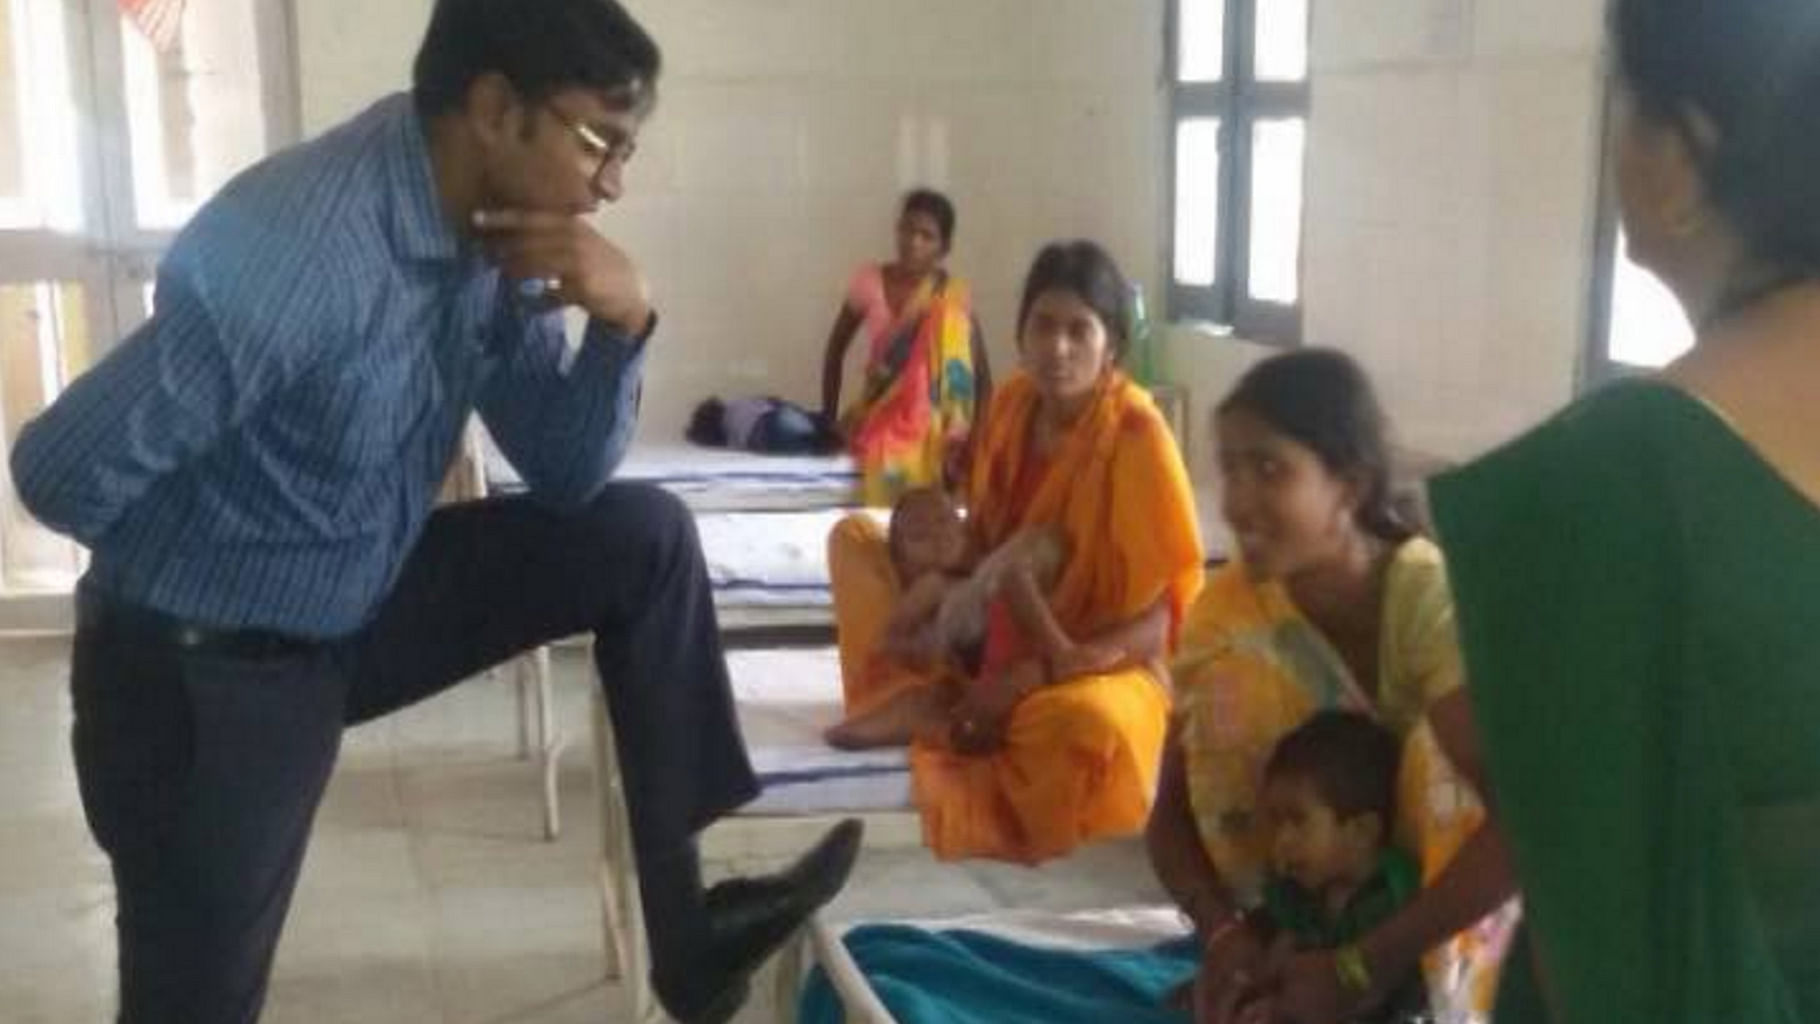 IAS officer Jagdish Sonkar’s photo went viral. (Photo Courtesy: <i><a href="http://english.pradesh18.com/news/chhattisgarh/ias-faces-suspension-for-putting-foot-on-hospital-bed-with-lady-patient-calls-it-style-889708.html">Pradesh 18</a></i>)